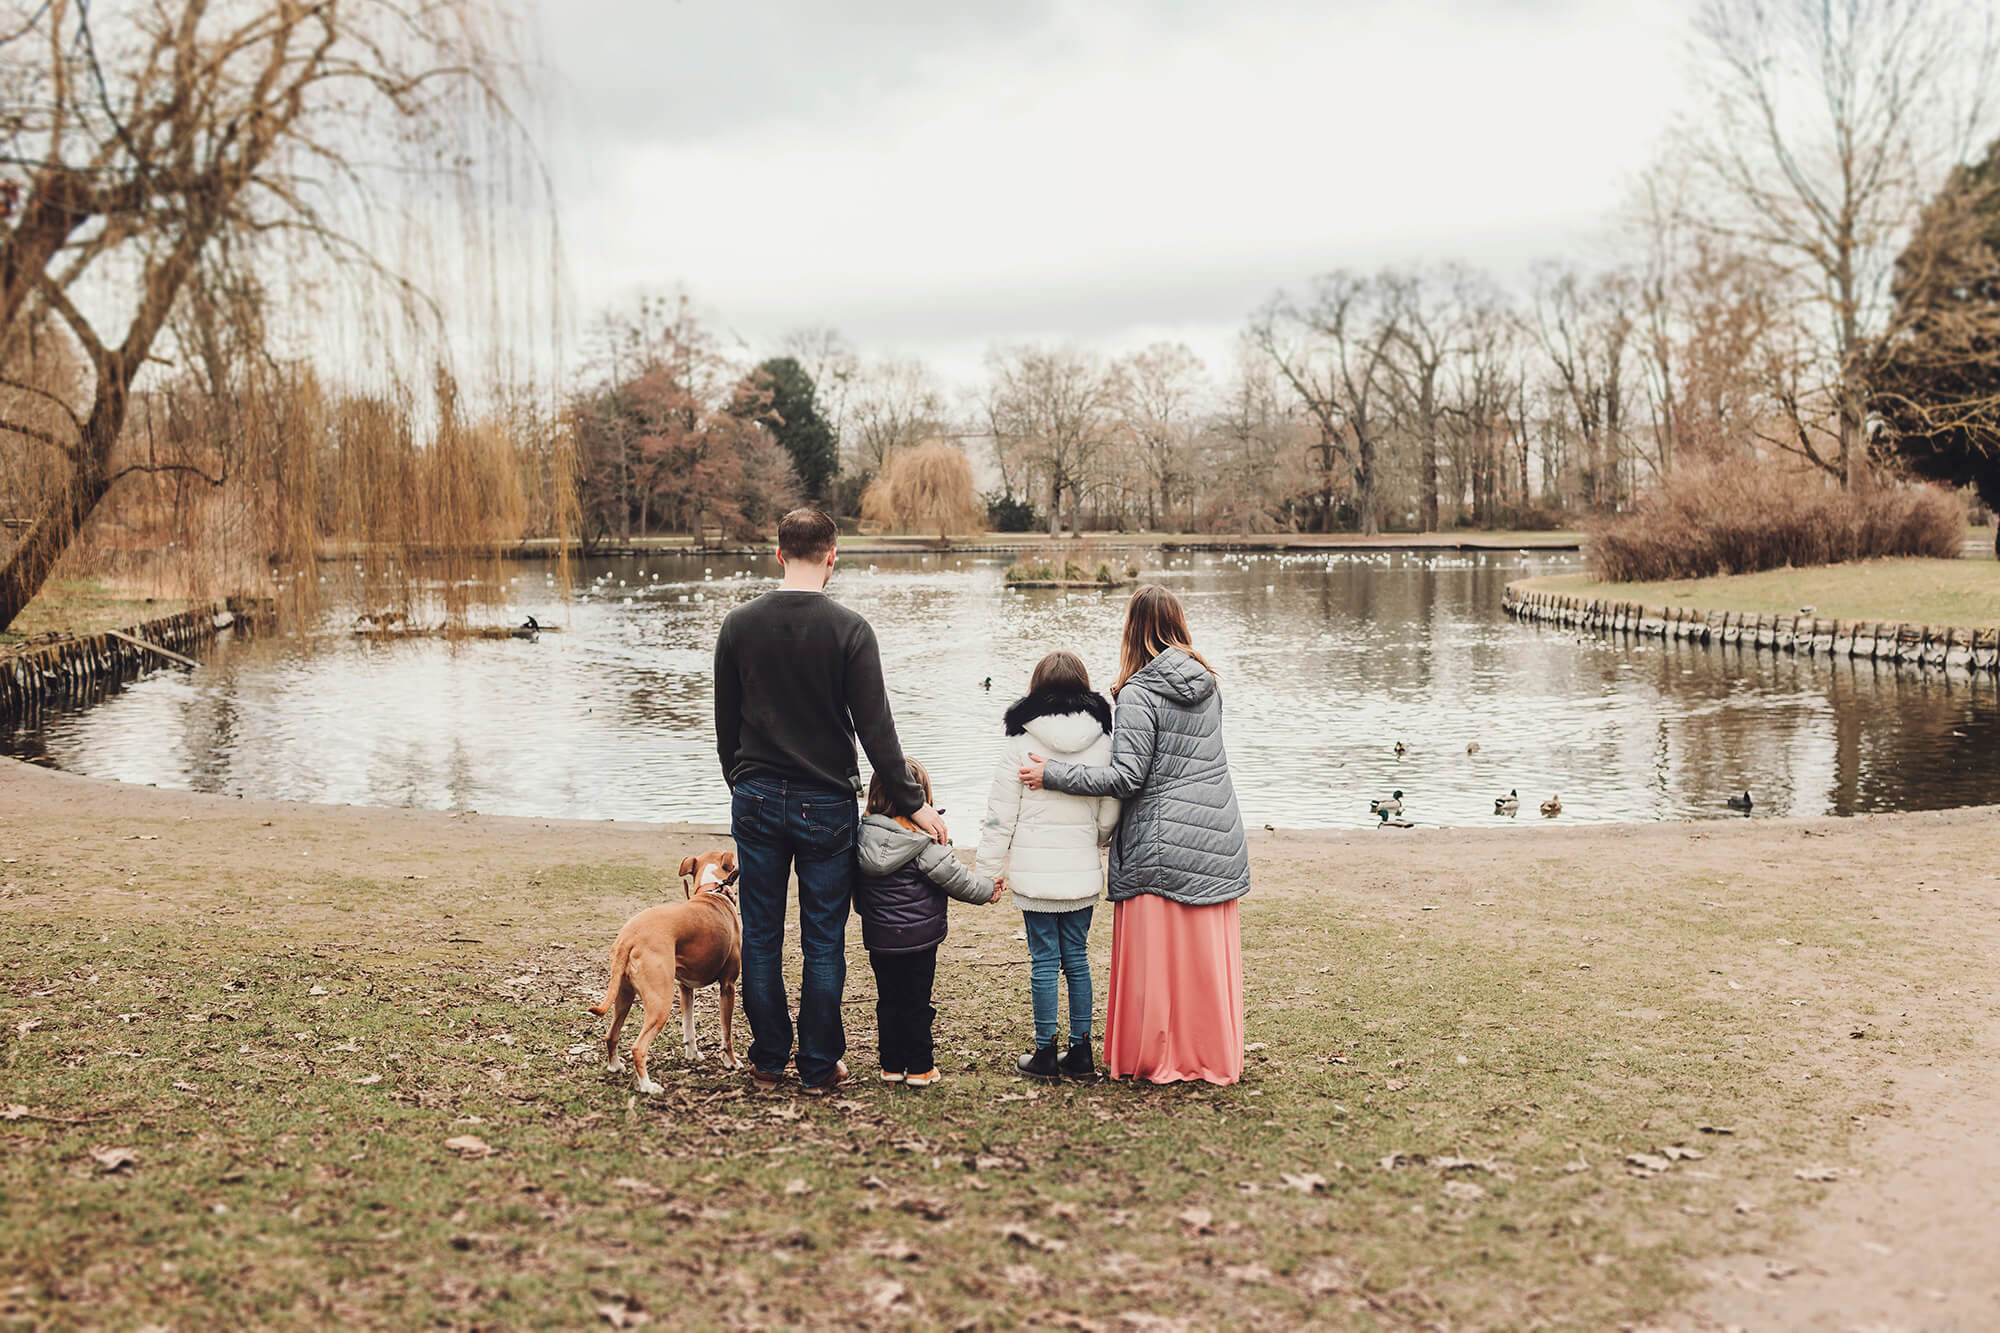 The Castelli family looking out over the lake at Biebrich park in Wiesbaden